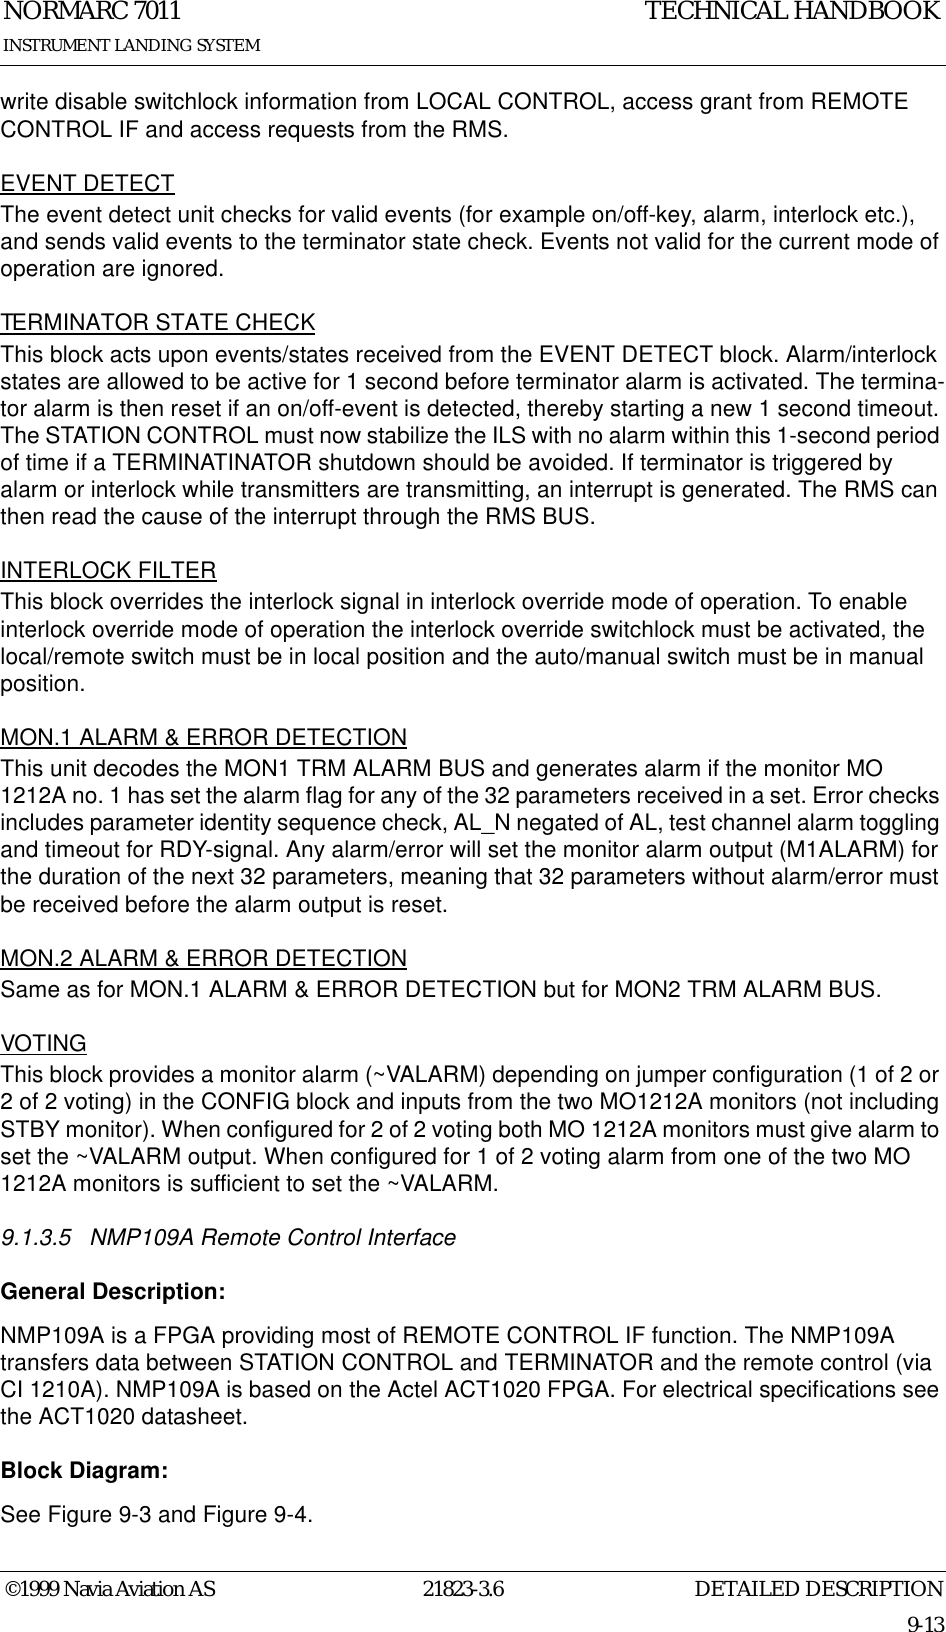 DETAILED DESCRIPTIONNORMARC 701121823-3.69-13INSTRUMENT LANDING SYSTEMTECHNICAL HANDBOOK©1999 Navia Aviation ASwrite disable switchlock information from LOCAL CONTROL, access grant from REMOTE CONTROL IF and access requests from the RMS.EVENT DETECTThe event detect unit checks for valid events (for example on/off-key, alarm, interlock etc.), and sends valid events to the terminator state check. Events not valid for the current mode of operation are ignored.TERMINATOR STATE CHECKThis block acts upon events/states received from the EVENT DETECT block. Alarm/interlock states are allowed to be active for 1 second before terminator alarm is activated. The termina-tor alarm is then reset if an on/off-event is detected, thereby starting a new 1 second timeout. The STATION CONTROL must now stabilize the ILS with no alarm within this 1-second period of time if a TERMINATINATOR shutdown should be avoided. If terminator is triggered by alarm or interlock while transmitters are transmitting, an interrupt is generated. The RMS can then read the cause of the interrupt through the RMS BUS.INTERLOCK FILTERThis block overrides the interlock signal in interlock override mode of operation. To enable interlock override mode of operation the interlock override switchlock must be activated, the local/remote switch must be in local position and the auto/manual switch must be in manual position.MON.1 ALARM &amp; ERROR DETECTIONThis unit decodes the MON1 TRM ALARM BUS and generates alarm if the monitor MO 1212A no. 1 has set the alarm flag for any of the 32 parameters received in a set. Error checks includes parameter identity sequence check, AL_N negated of AL, test channel alarm toggling and timeout for RDY-signal. Any alarm/error will set the monitor alarm output (M1ALARM) for the duration of the next 32 parameters, meaning that 32 parameters without alarm/error must be received before the alarm output is reset.MON.2 ALARM &amp; ERROR DETECTIONSame as for MON.1 ALARM &amp; ERROR DETECTION but for MON2 TRM ALARM BUS.VOTINGThis block provides a monitor alarm (~VALARM) depending on jumper configuration (1 of 2 or 2 of 2 voting) in the CONFIG block and inputs from the two MO1212A monitors (not including STBY monitor). When configured for 2 of 2 voting both MO 1212A monitors must give alarm to set the ~VALARM output. When configured for 1 of 2 voting alarm from one of the two MO 1212A monitors is sufficient to set the ~VALARM.9.1.3.5 NMP109A Remote Control InterfaceGeneral Description:NMP109A is a FPGA providing most of REMOTE CONTROL IF function. The NMP109A transfers data between STATION CONTROL and TERMINATOR and the remote control (via CI 1210A). NMP109A is based on the Actel ACT1020 FPGA. For electrical specifications see the ACT1020 datasheet.Block Diagram:See Figure 9-3 and Figure 9-4.